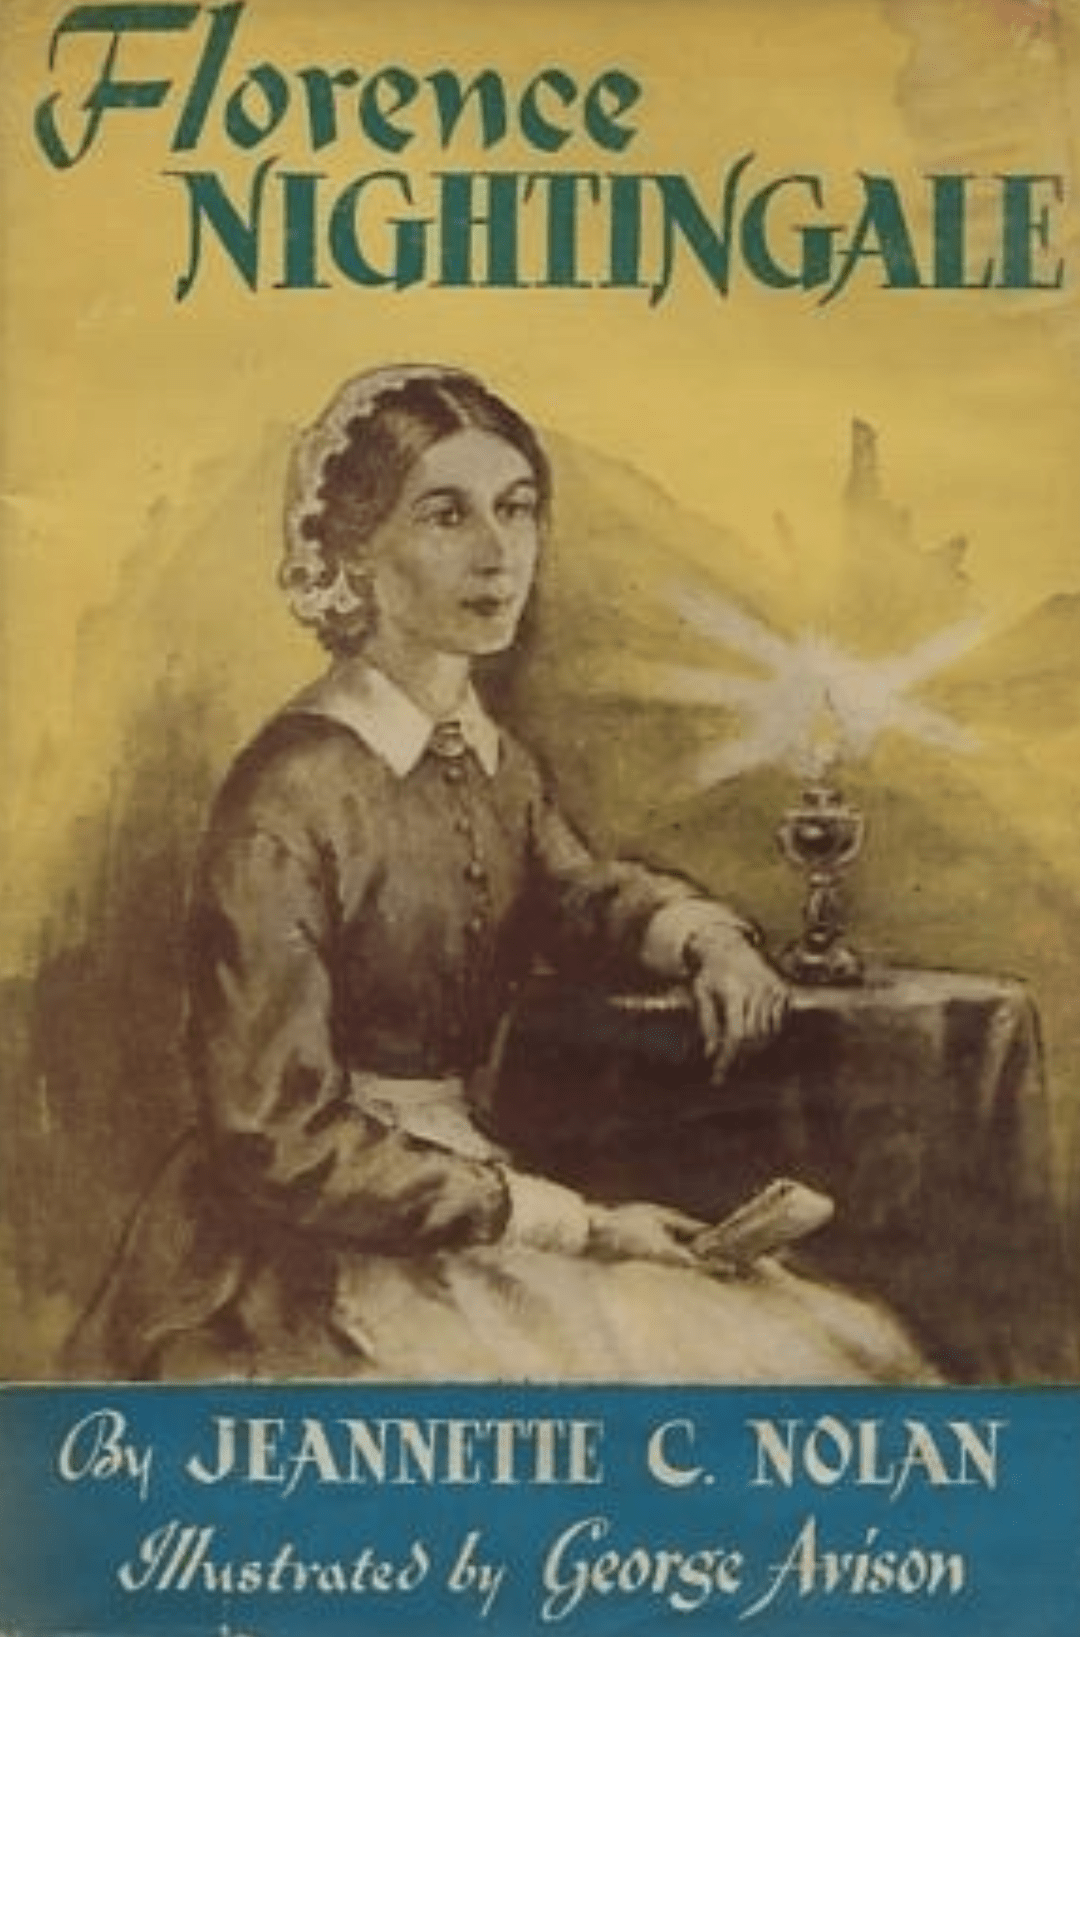 Florence Nightingale by Jeannette Covert Nolan